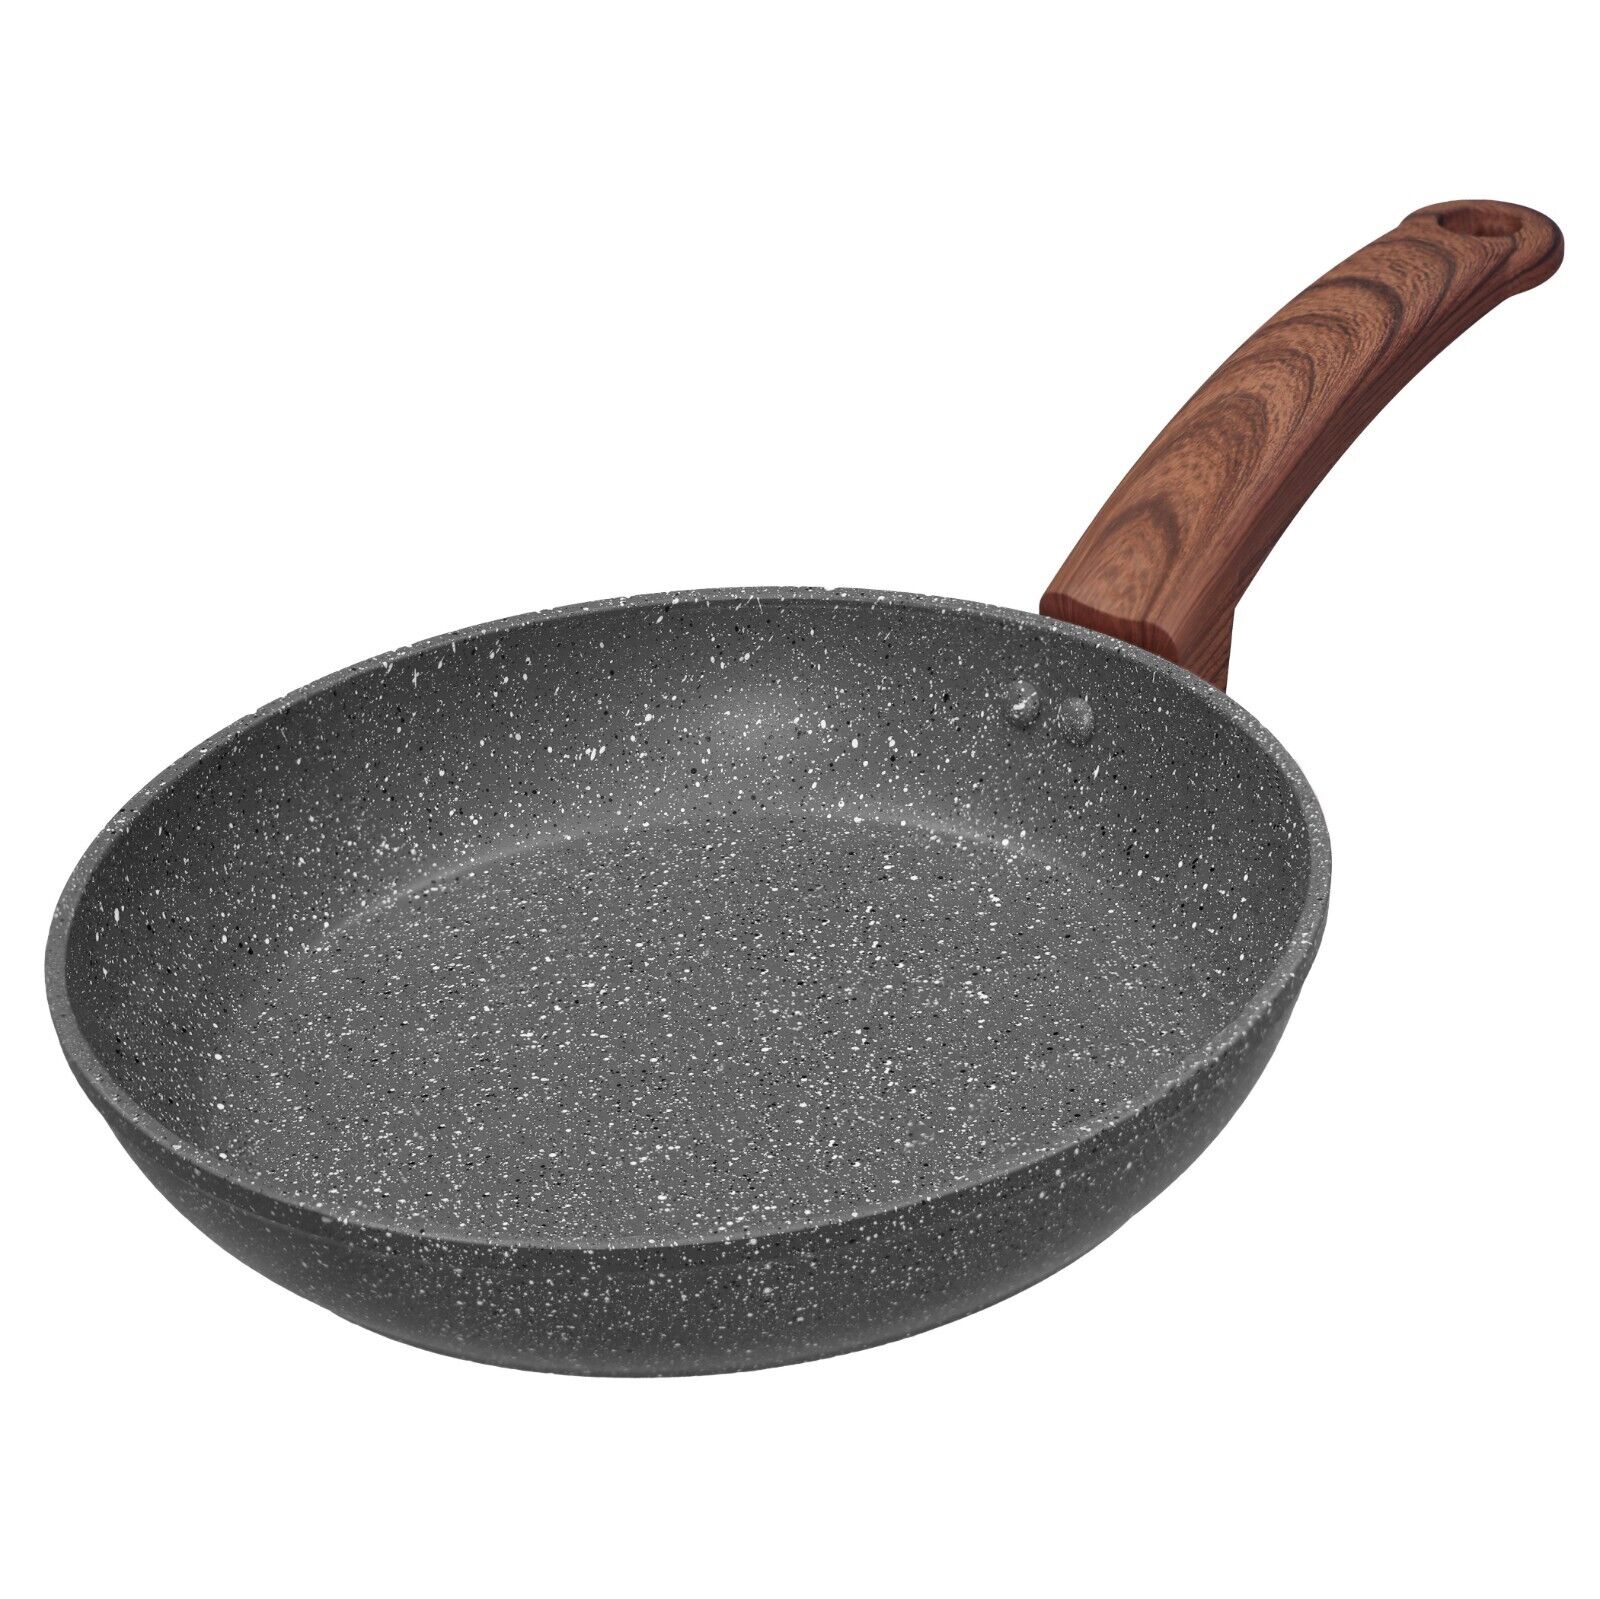 /skillet Granite Stone 8" 10" Chef's Pan Induction Compatibl